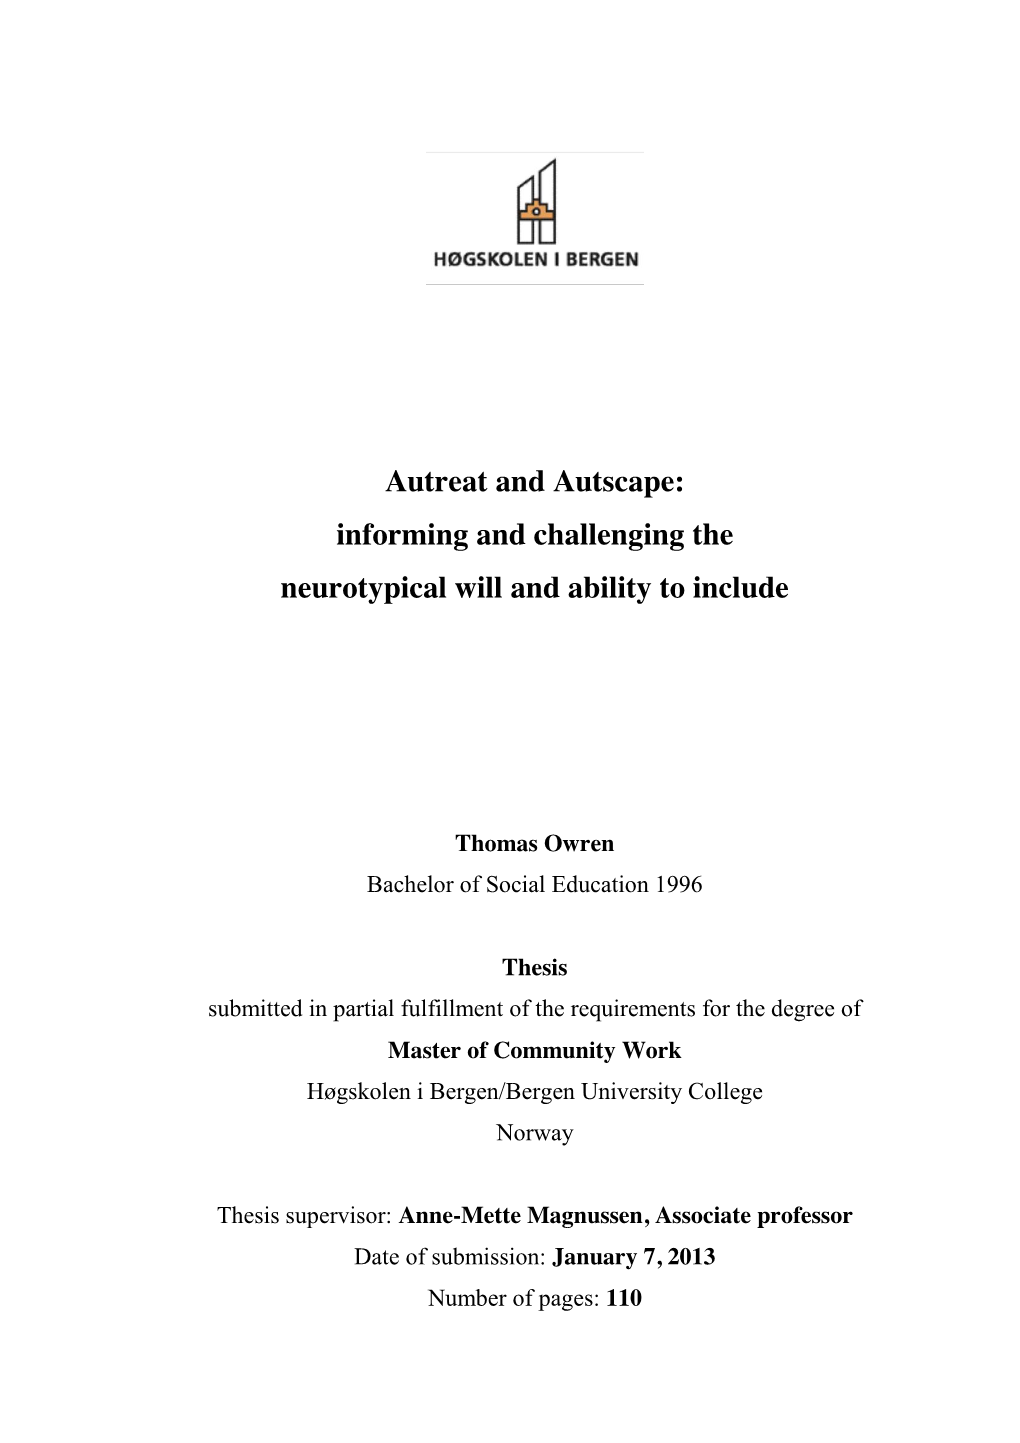 Autreat and Autscape: Informing and Challenging the Neurotypical Will and Ability to Include